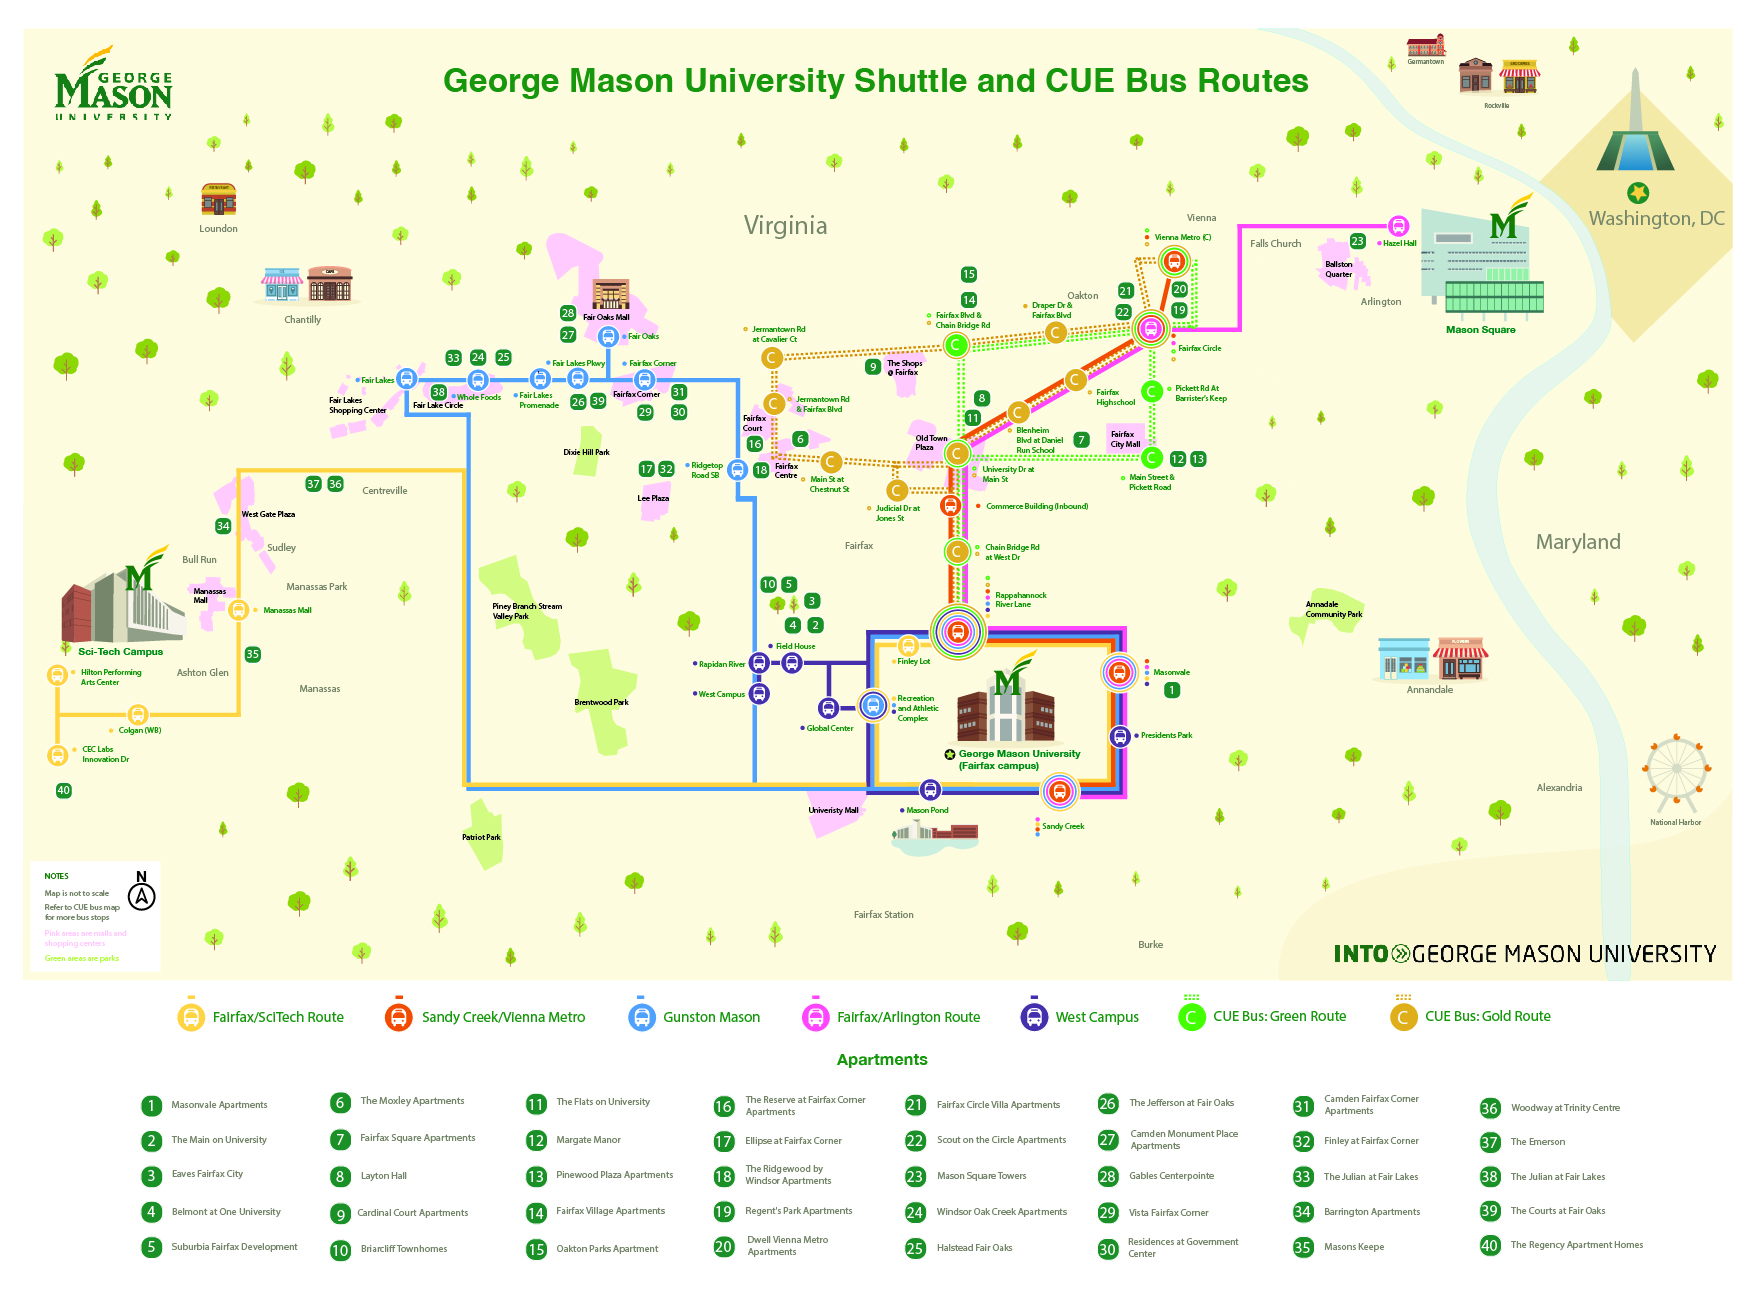 Mason shuttle and CUE bus routes with off-campus apartments